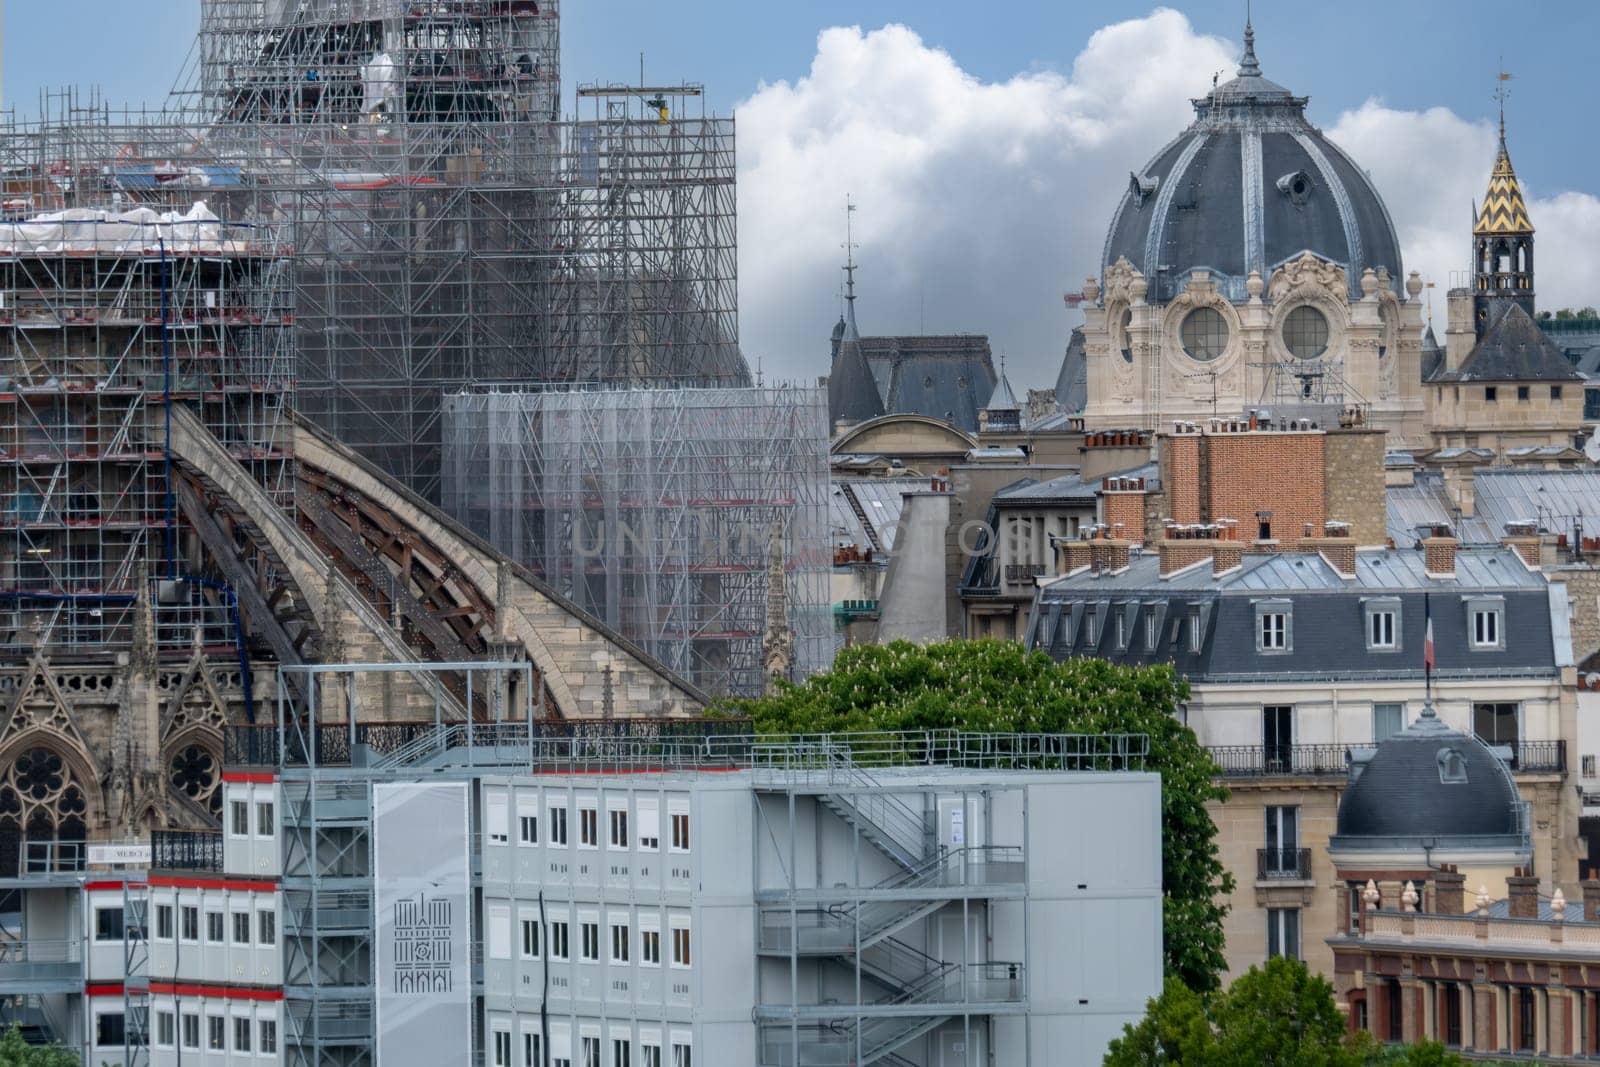 6 May 2023. Paris, France. Restoration and repair work continues in the city of Paris in preparation for the 2024 Olympics. Many famous landmarks are visible in the distance. Selective focus